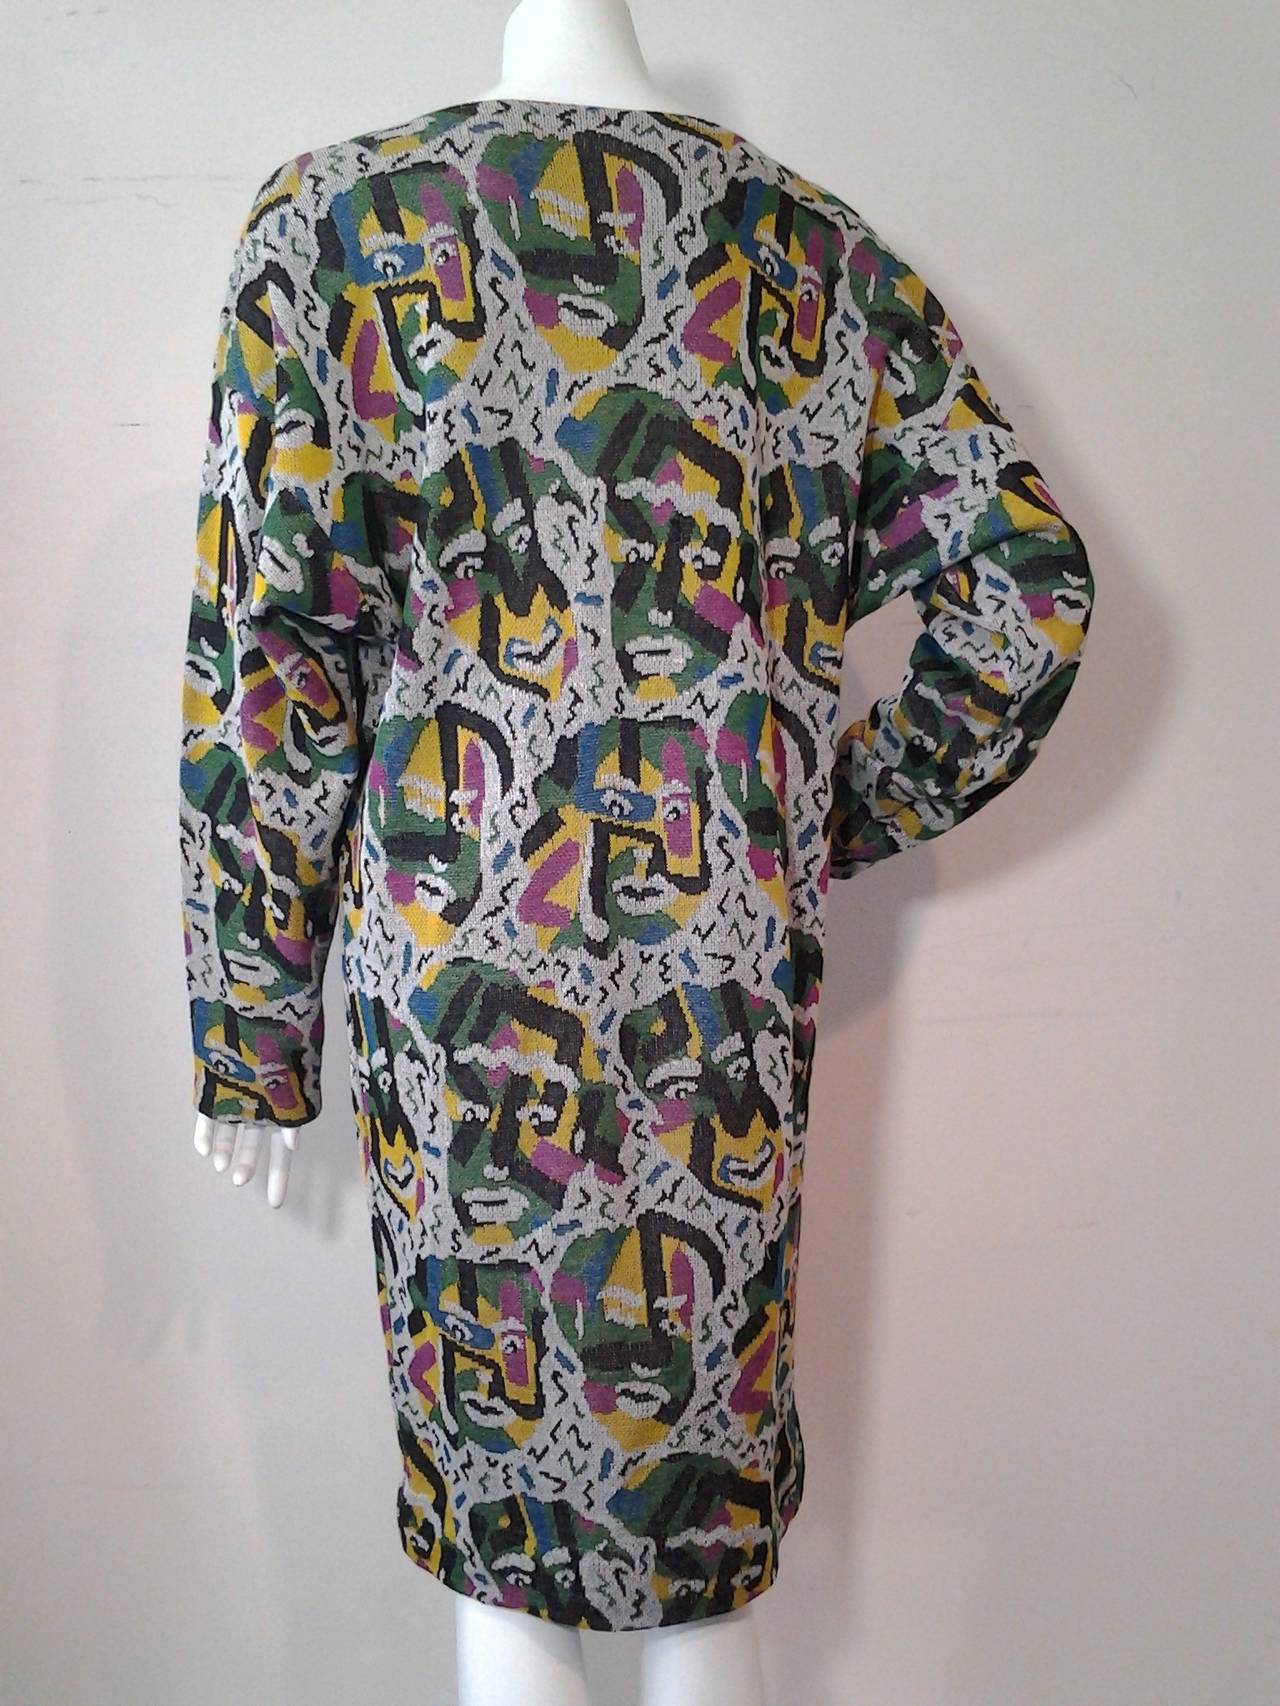 Black 1980s Missoni Knit Sweater Dress w/ Abstract Faces